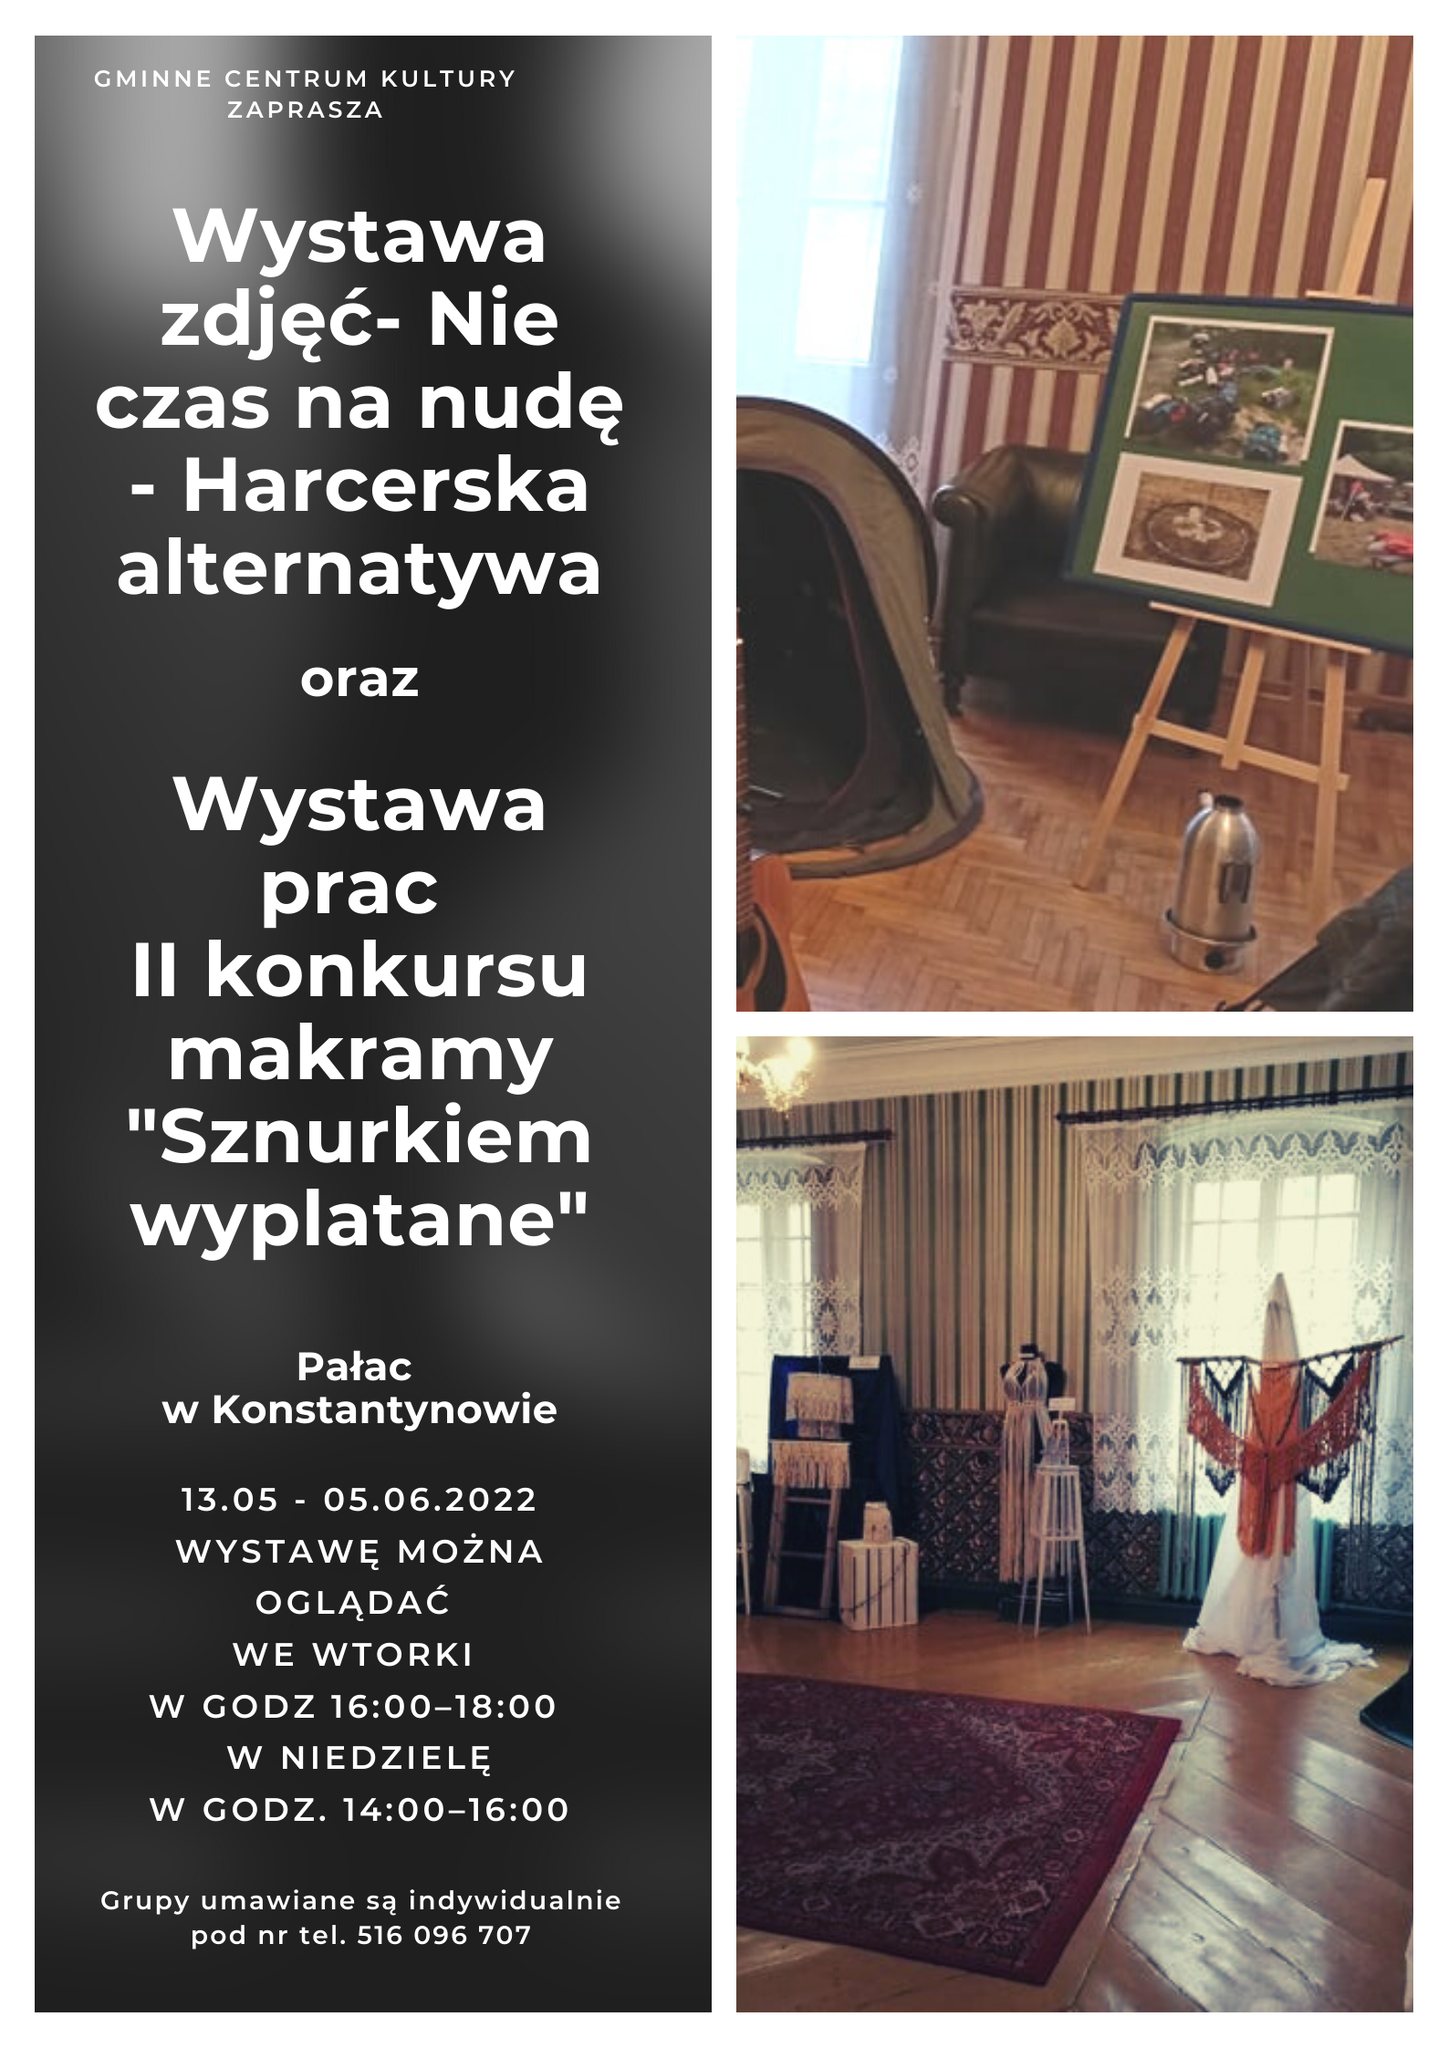 You are currently viewing Wystawy – Konstantynów pałac 13.05.2022 – 5.06.2022r.